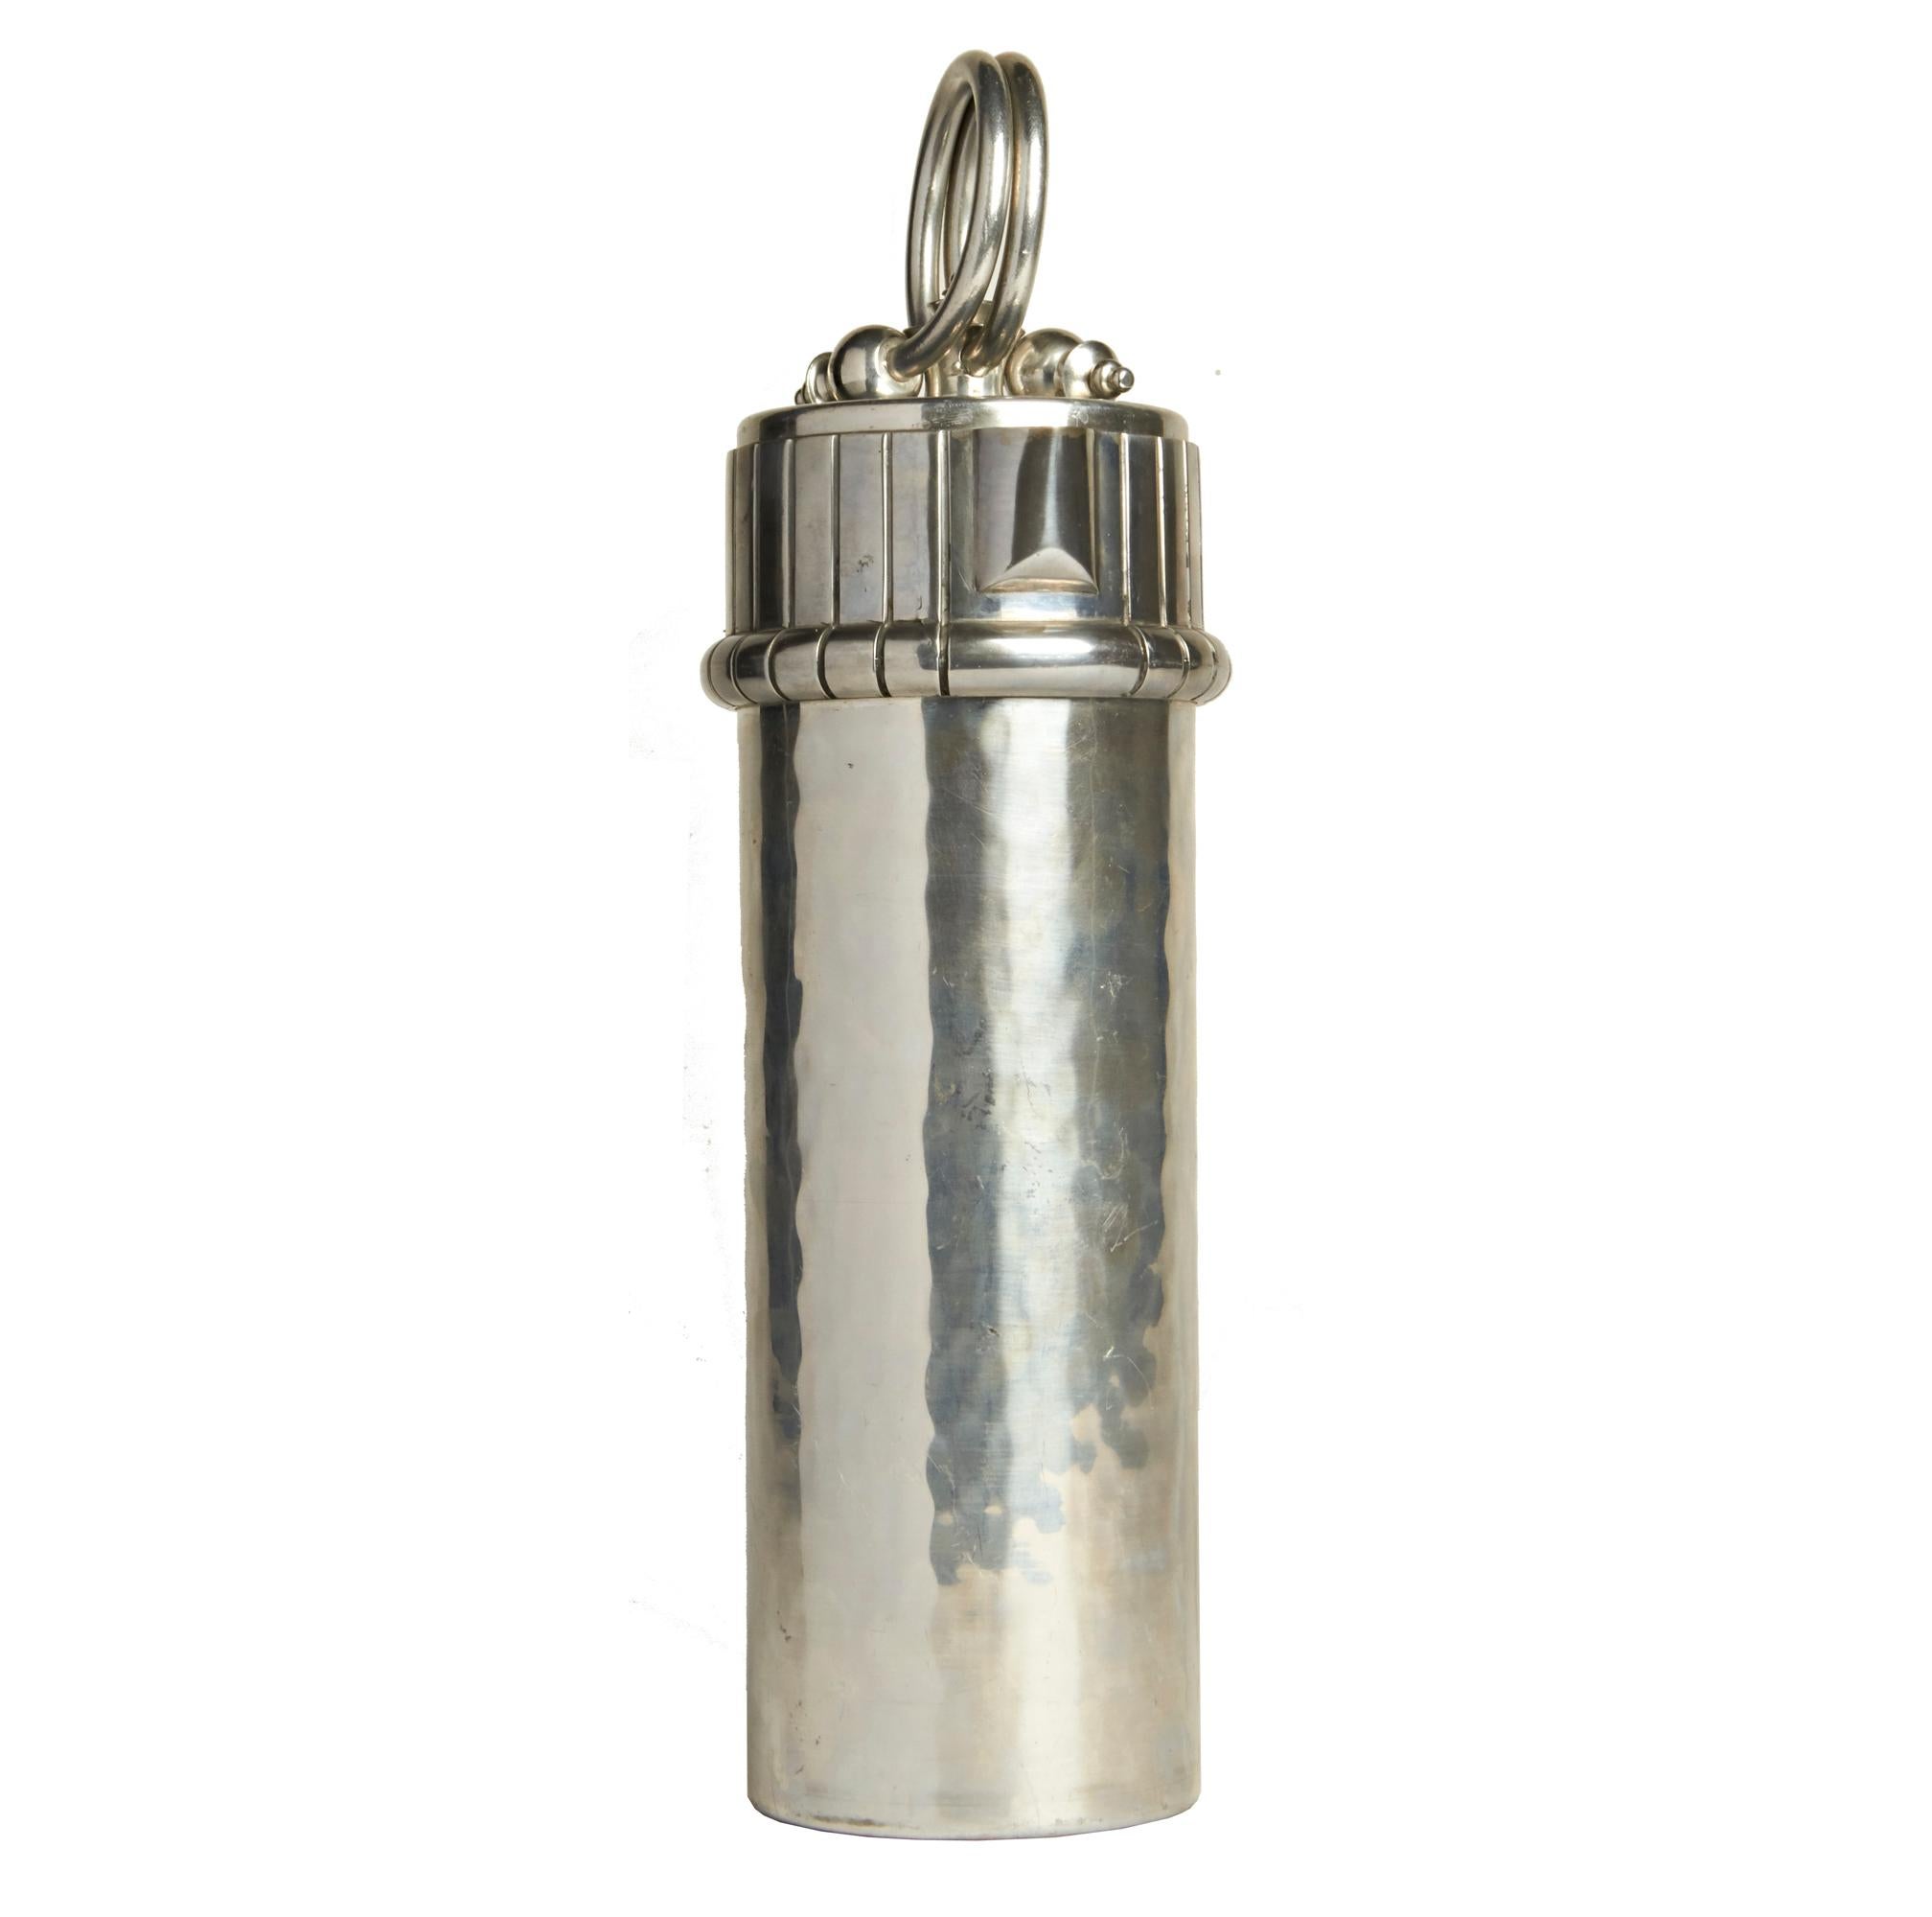 This beautifully designed, near mint, Art Deco cocktail shaker was designed by Fredrick Buehner for his Buenilum range of aluminum products first trademarked in 1933. This particular example is NOS with a bright shiny exterior and showing no